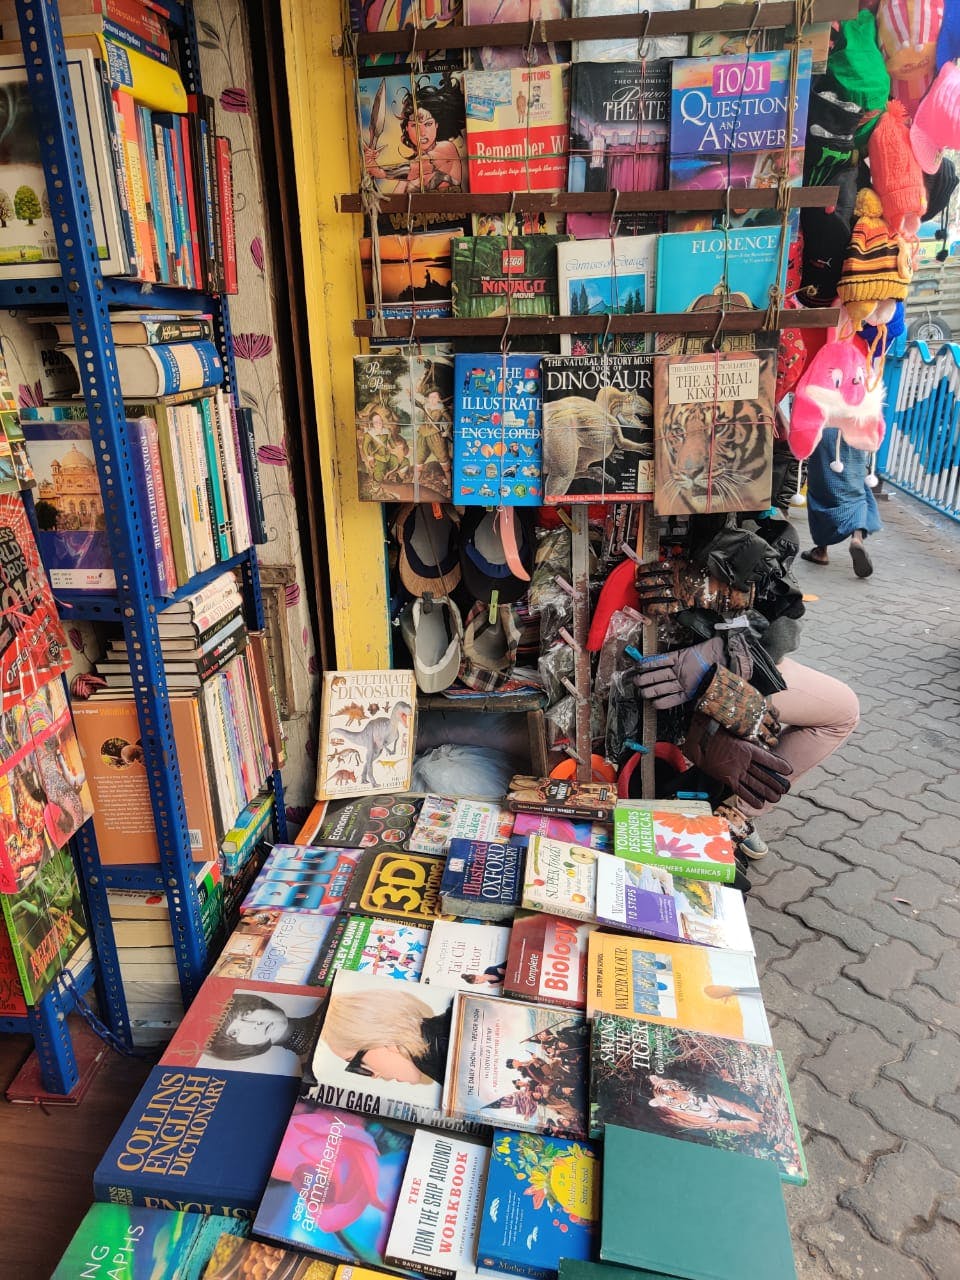 Bookselling,Selling,Snapshot,Retail,Building,Bazaar,Market,Publication,Collection,Book